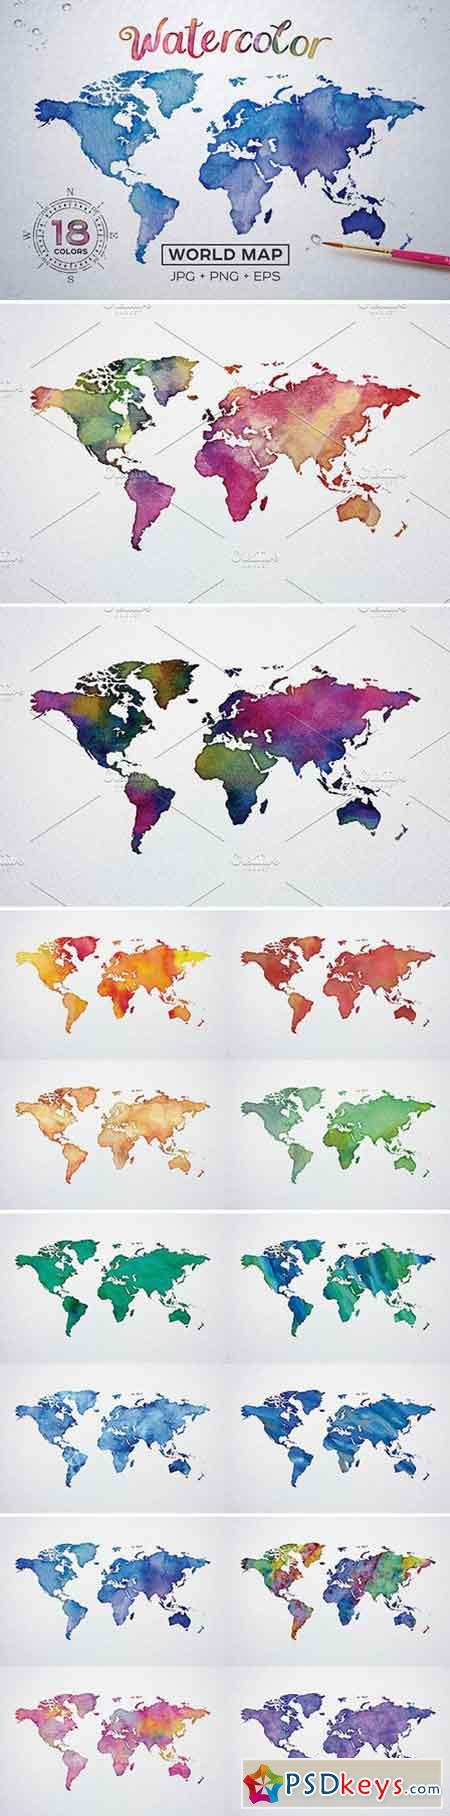 Watercolor World Maps JPG+EPS+PNG 838899